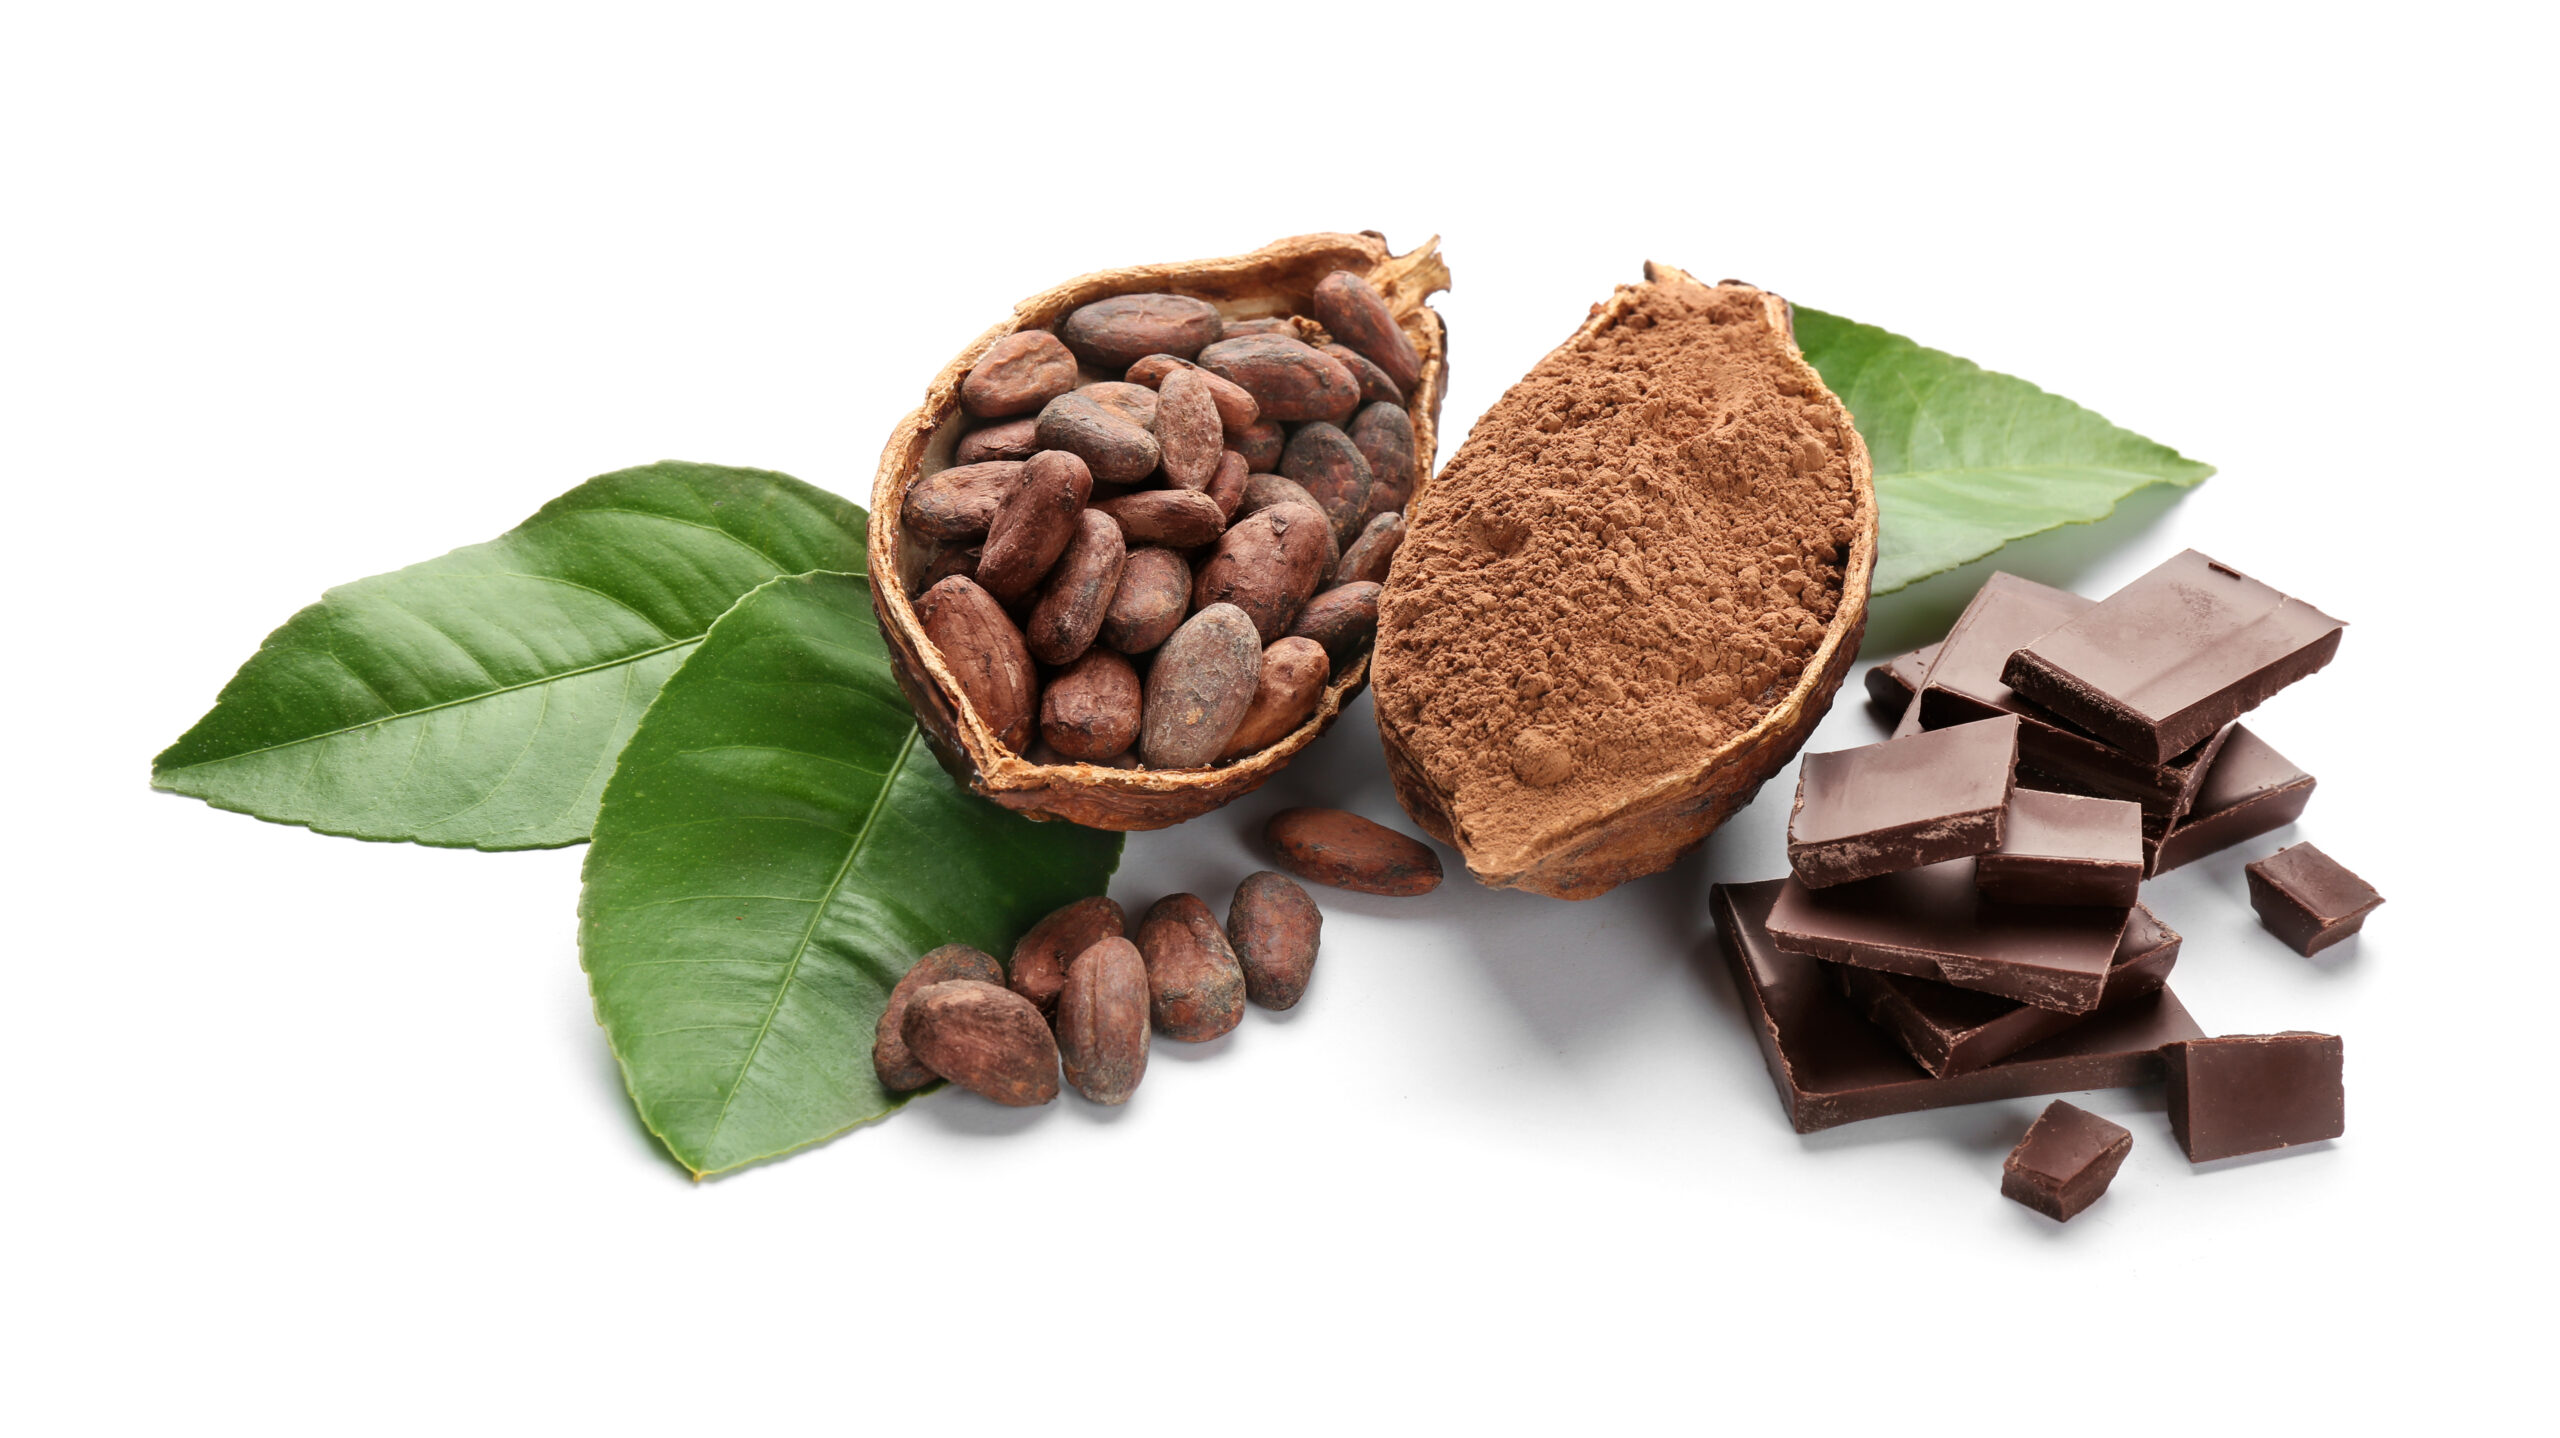 Cocoa Flavanol Supplement Shows Promise for Reducing Cardiovascular Risk